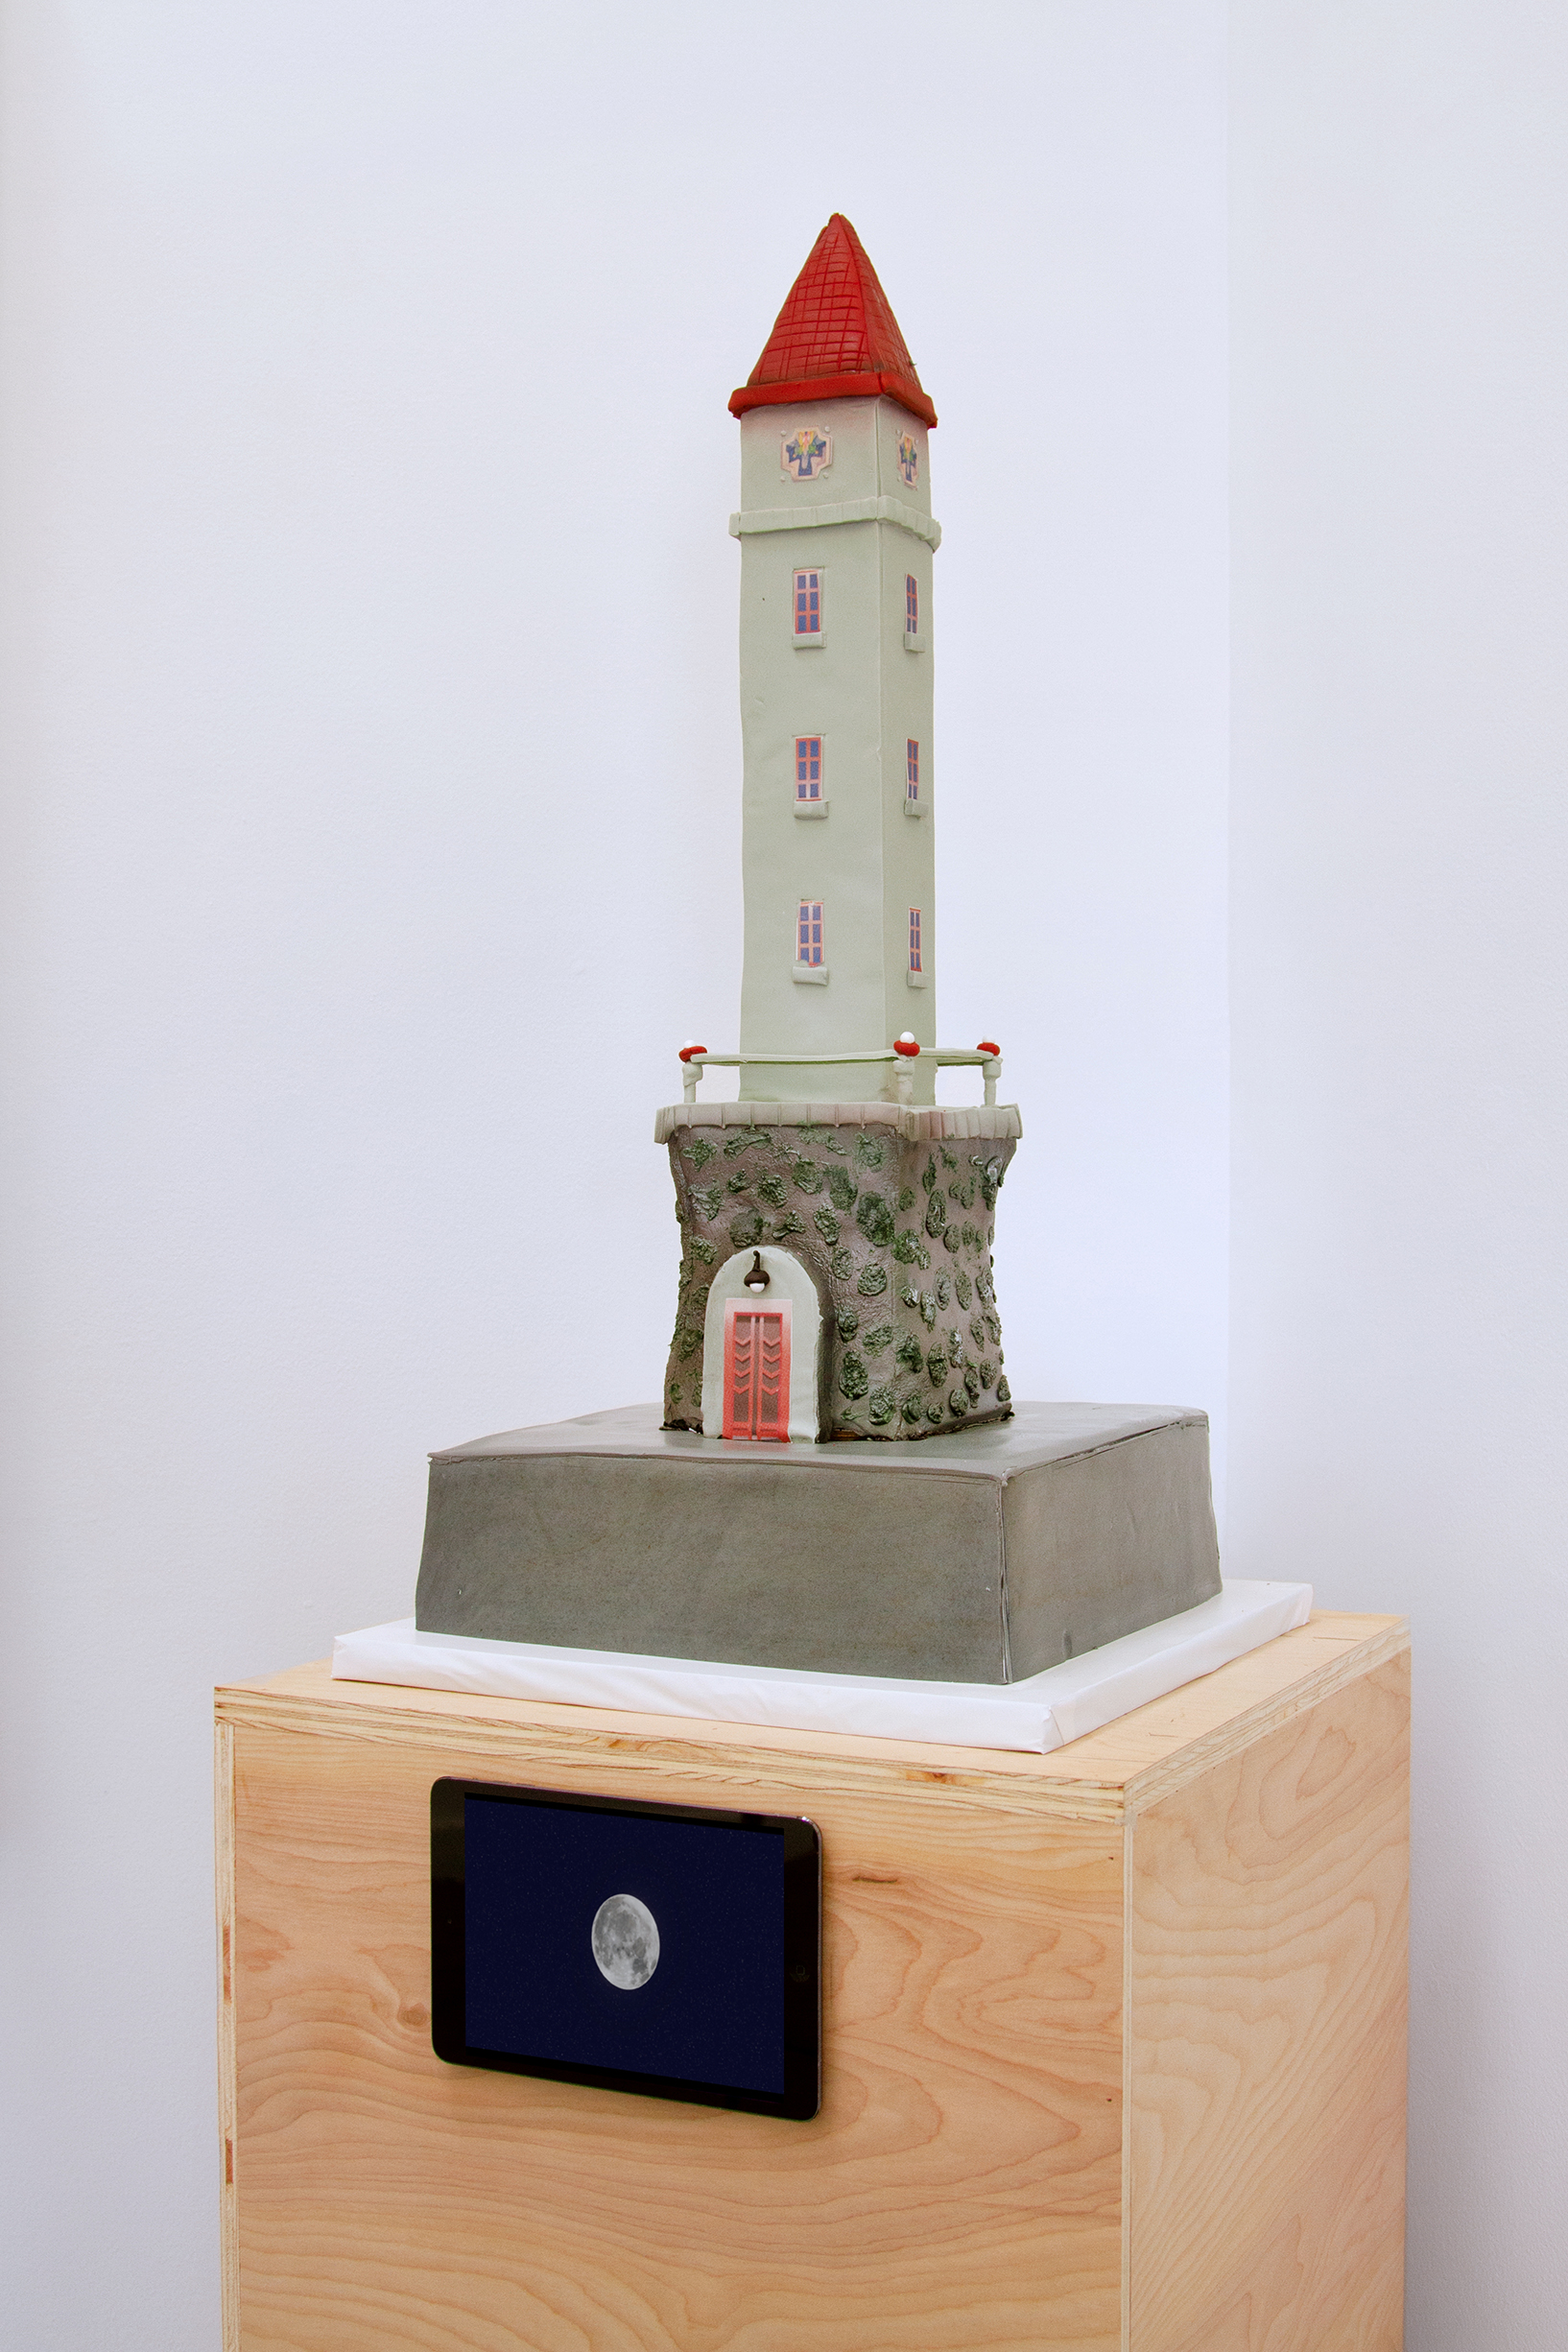 3/4 view of a tower shaped cake on a wooden pedestal